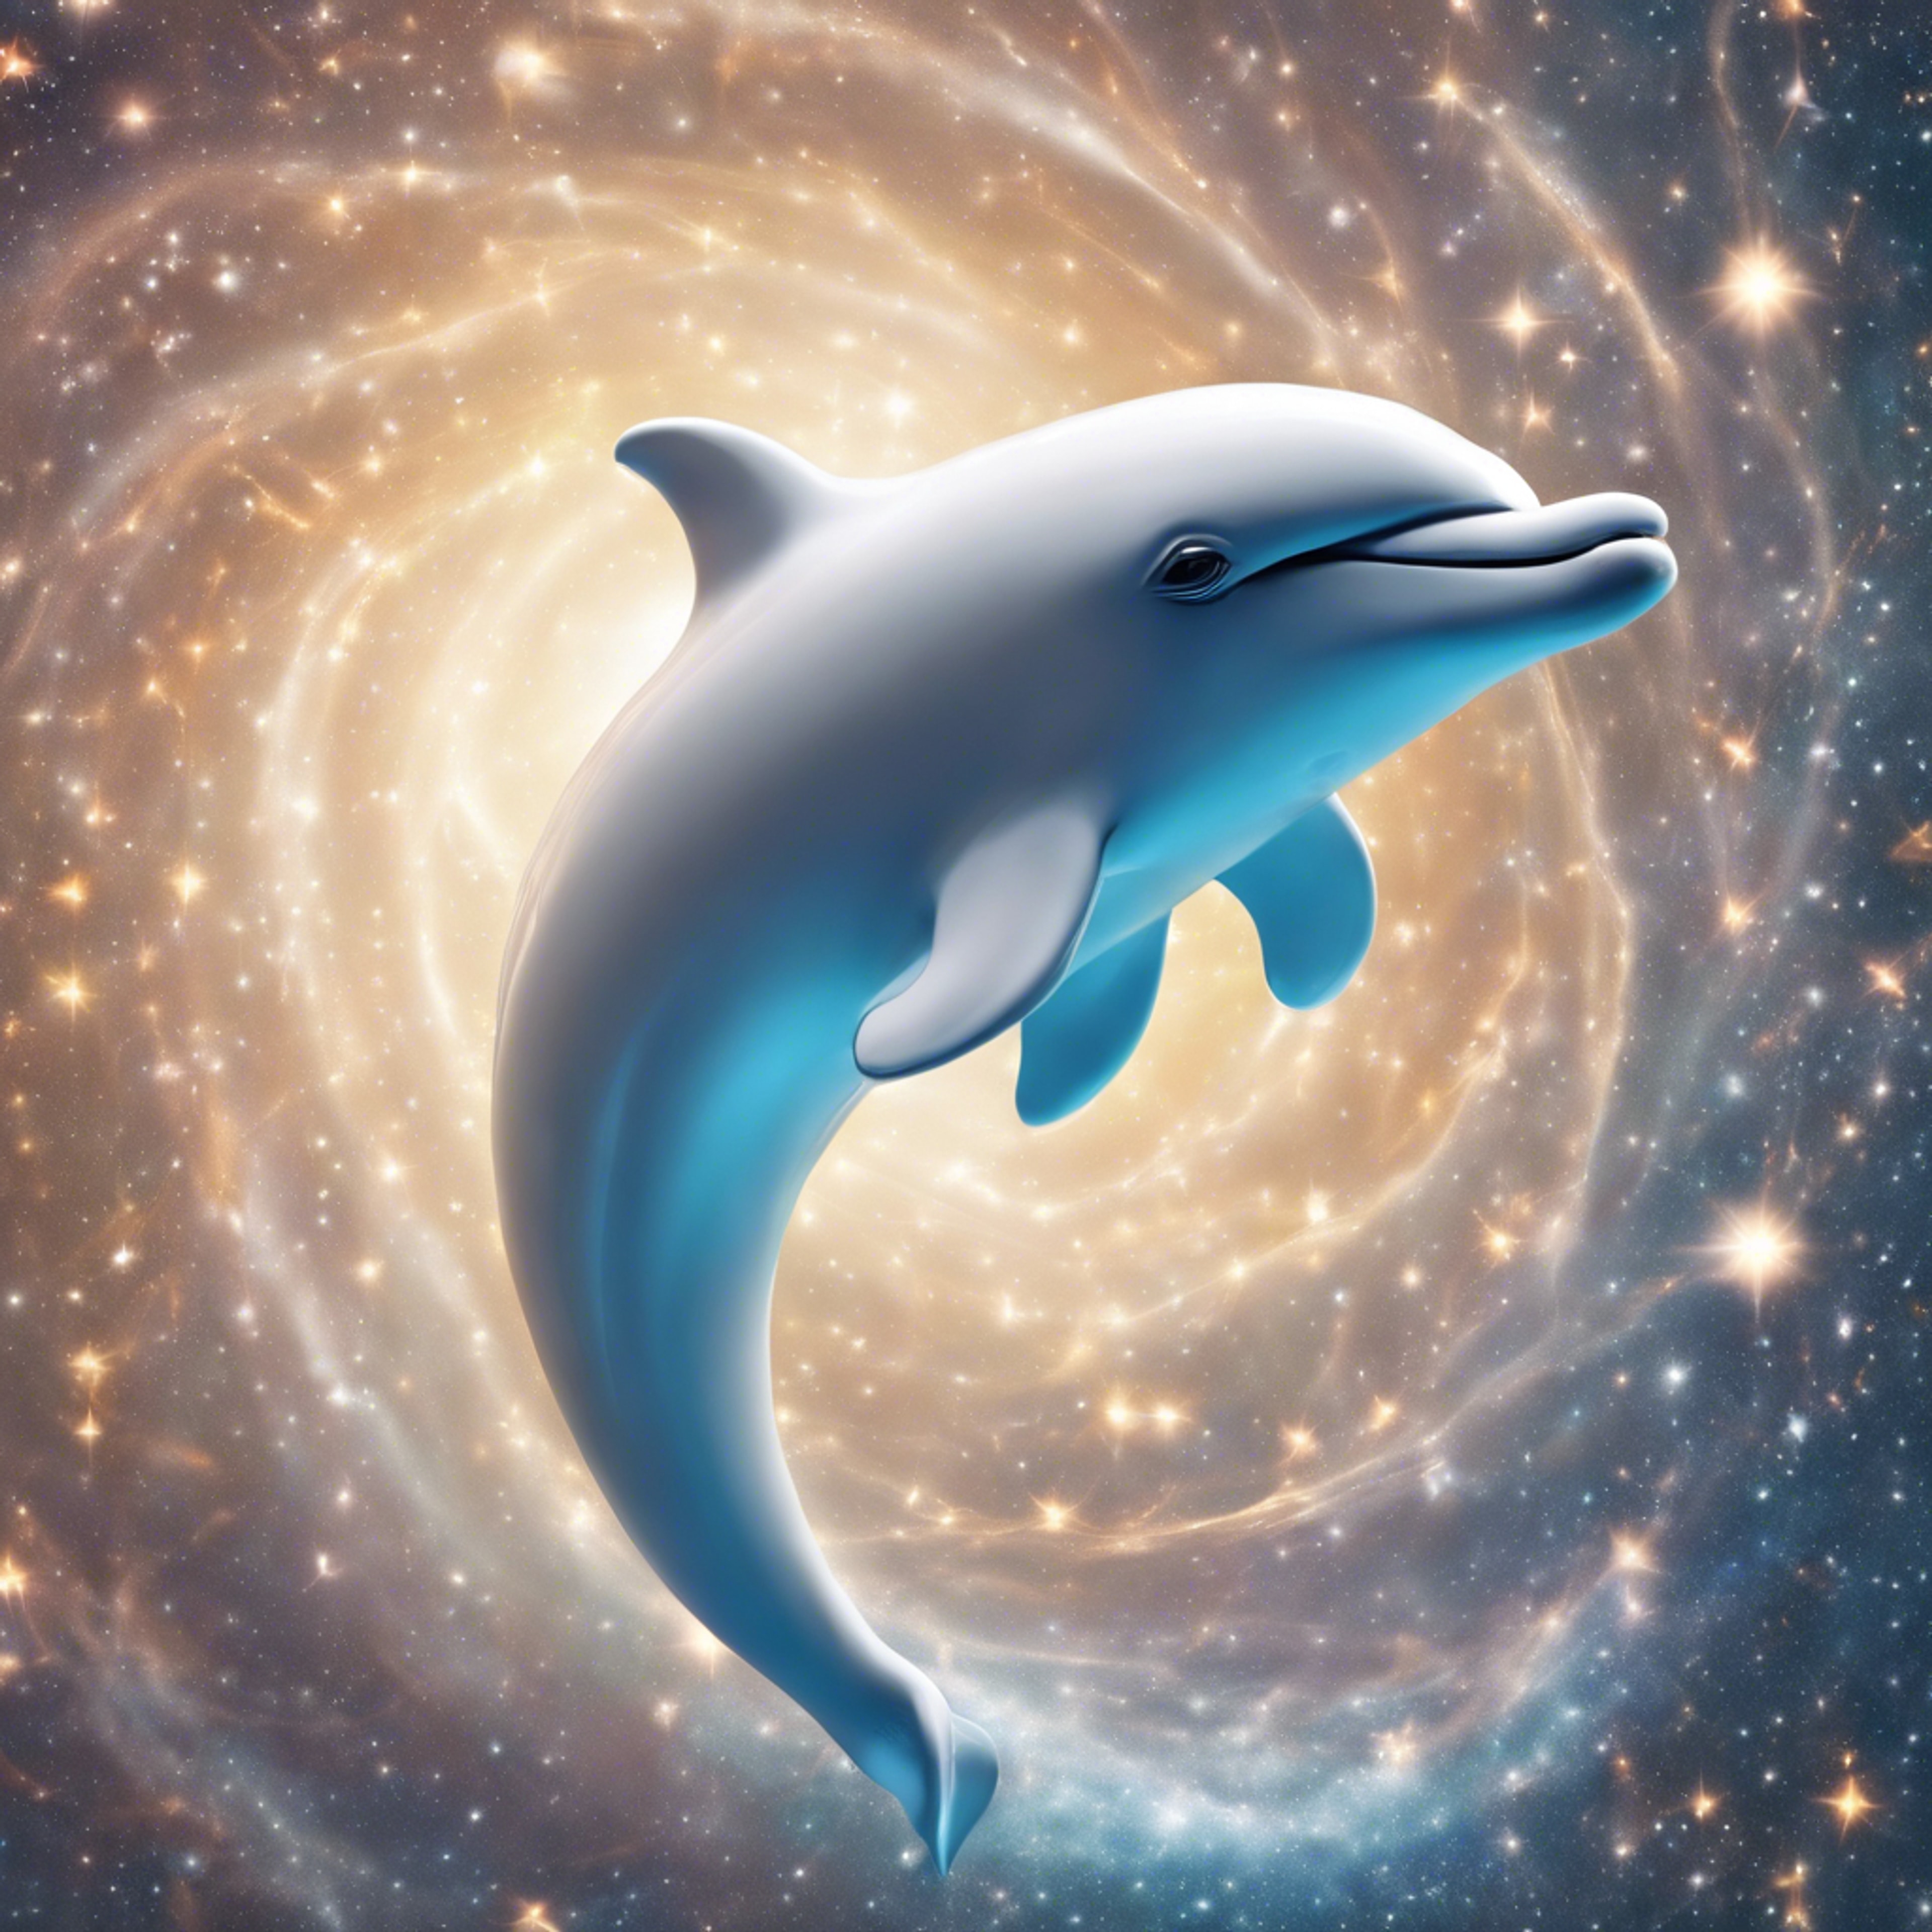 An artist's dreamy portrayal of a porcelain-white dolphin emerging from a swirl of stars in the endless cosmos. Шпалери[07abc05d40734834903a]